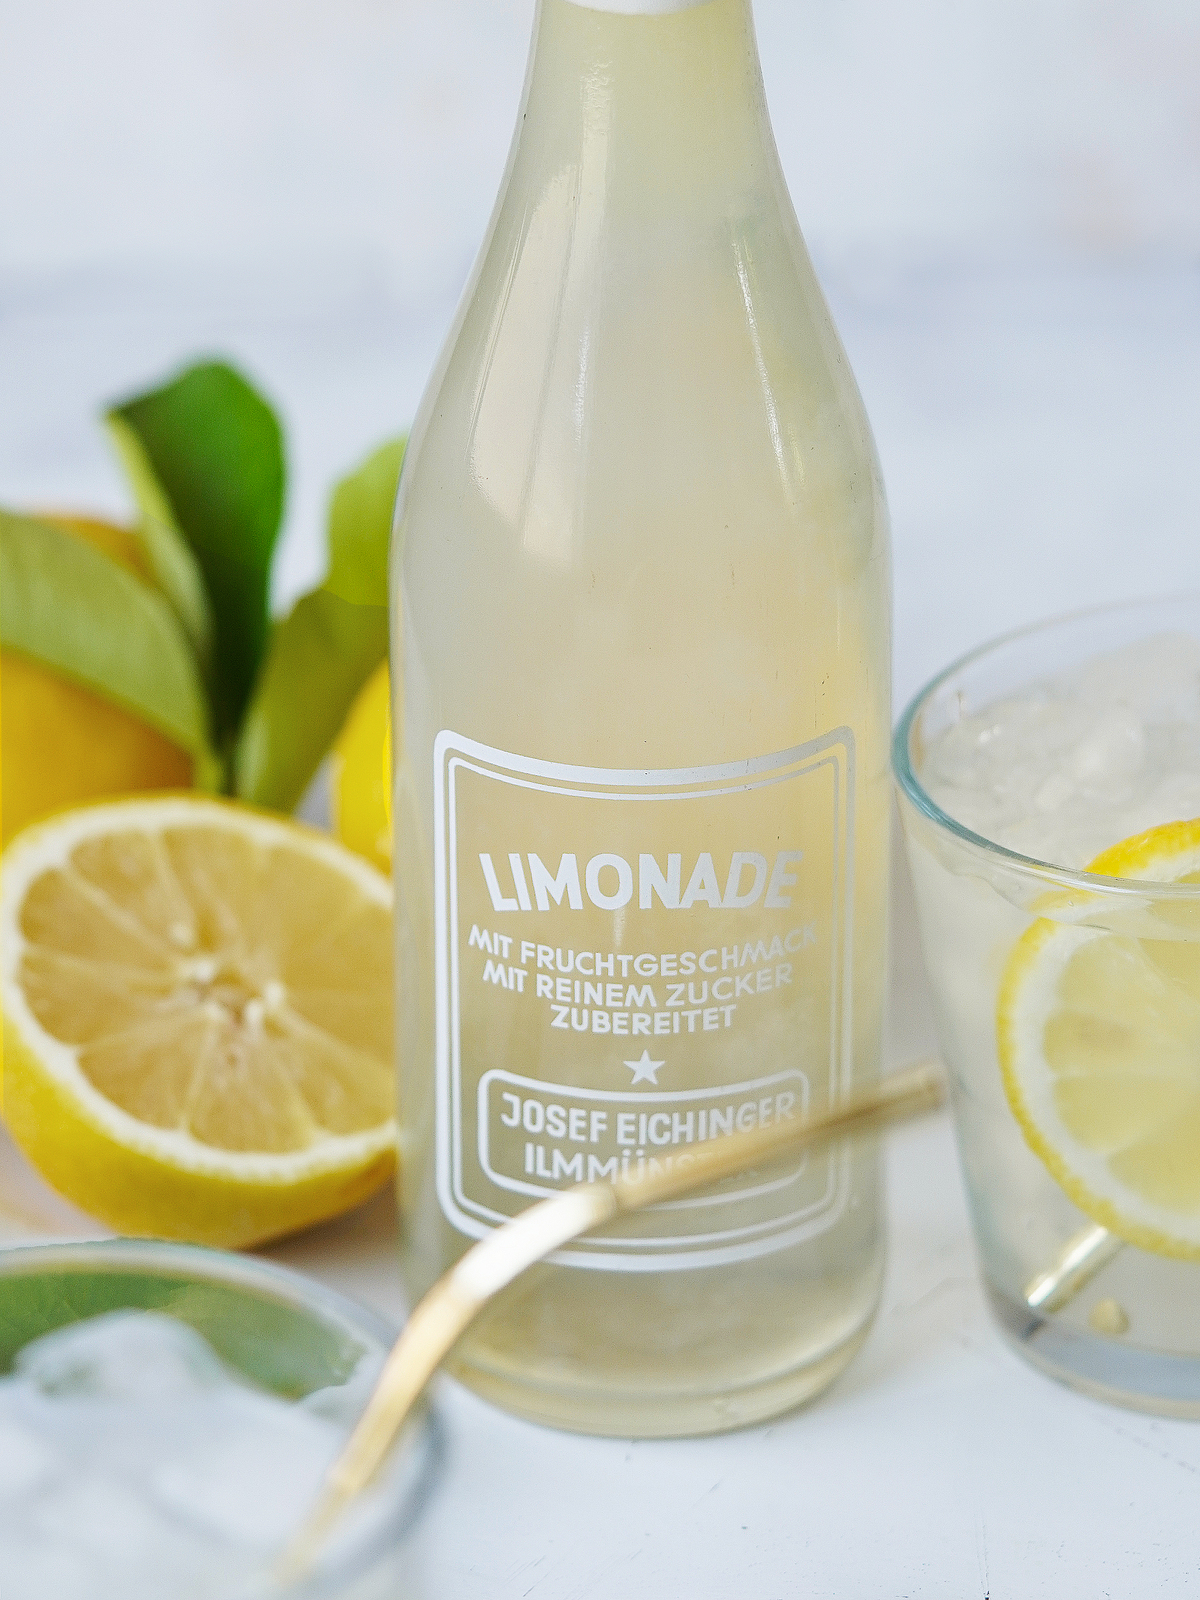 A bottle of limonada with lemons on the side and a glass with ice.